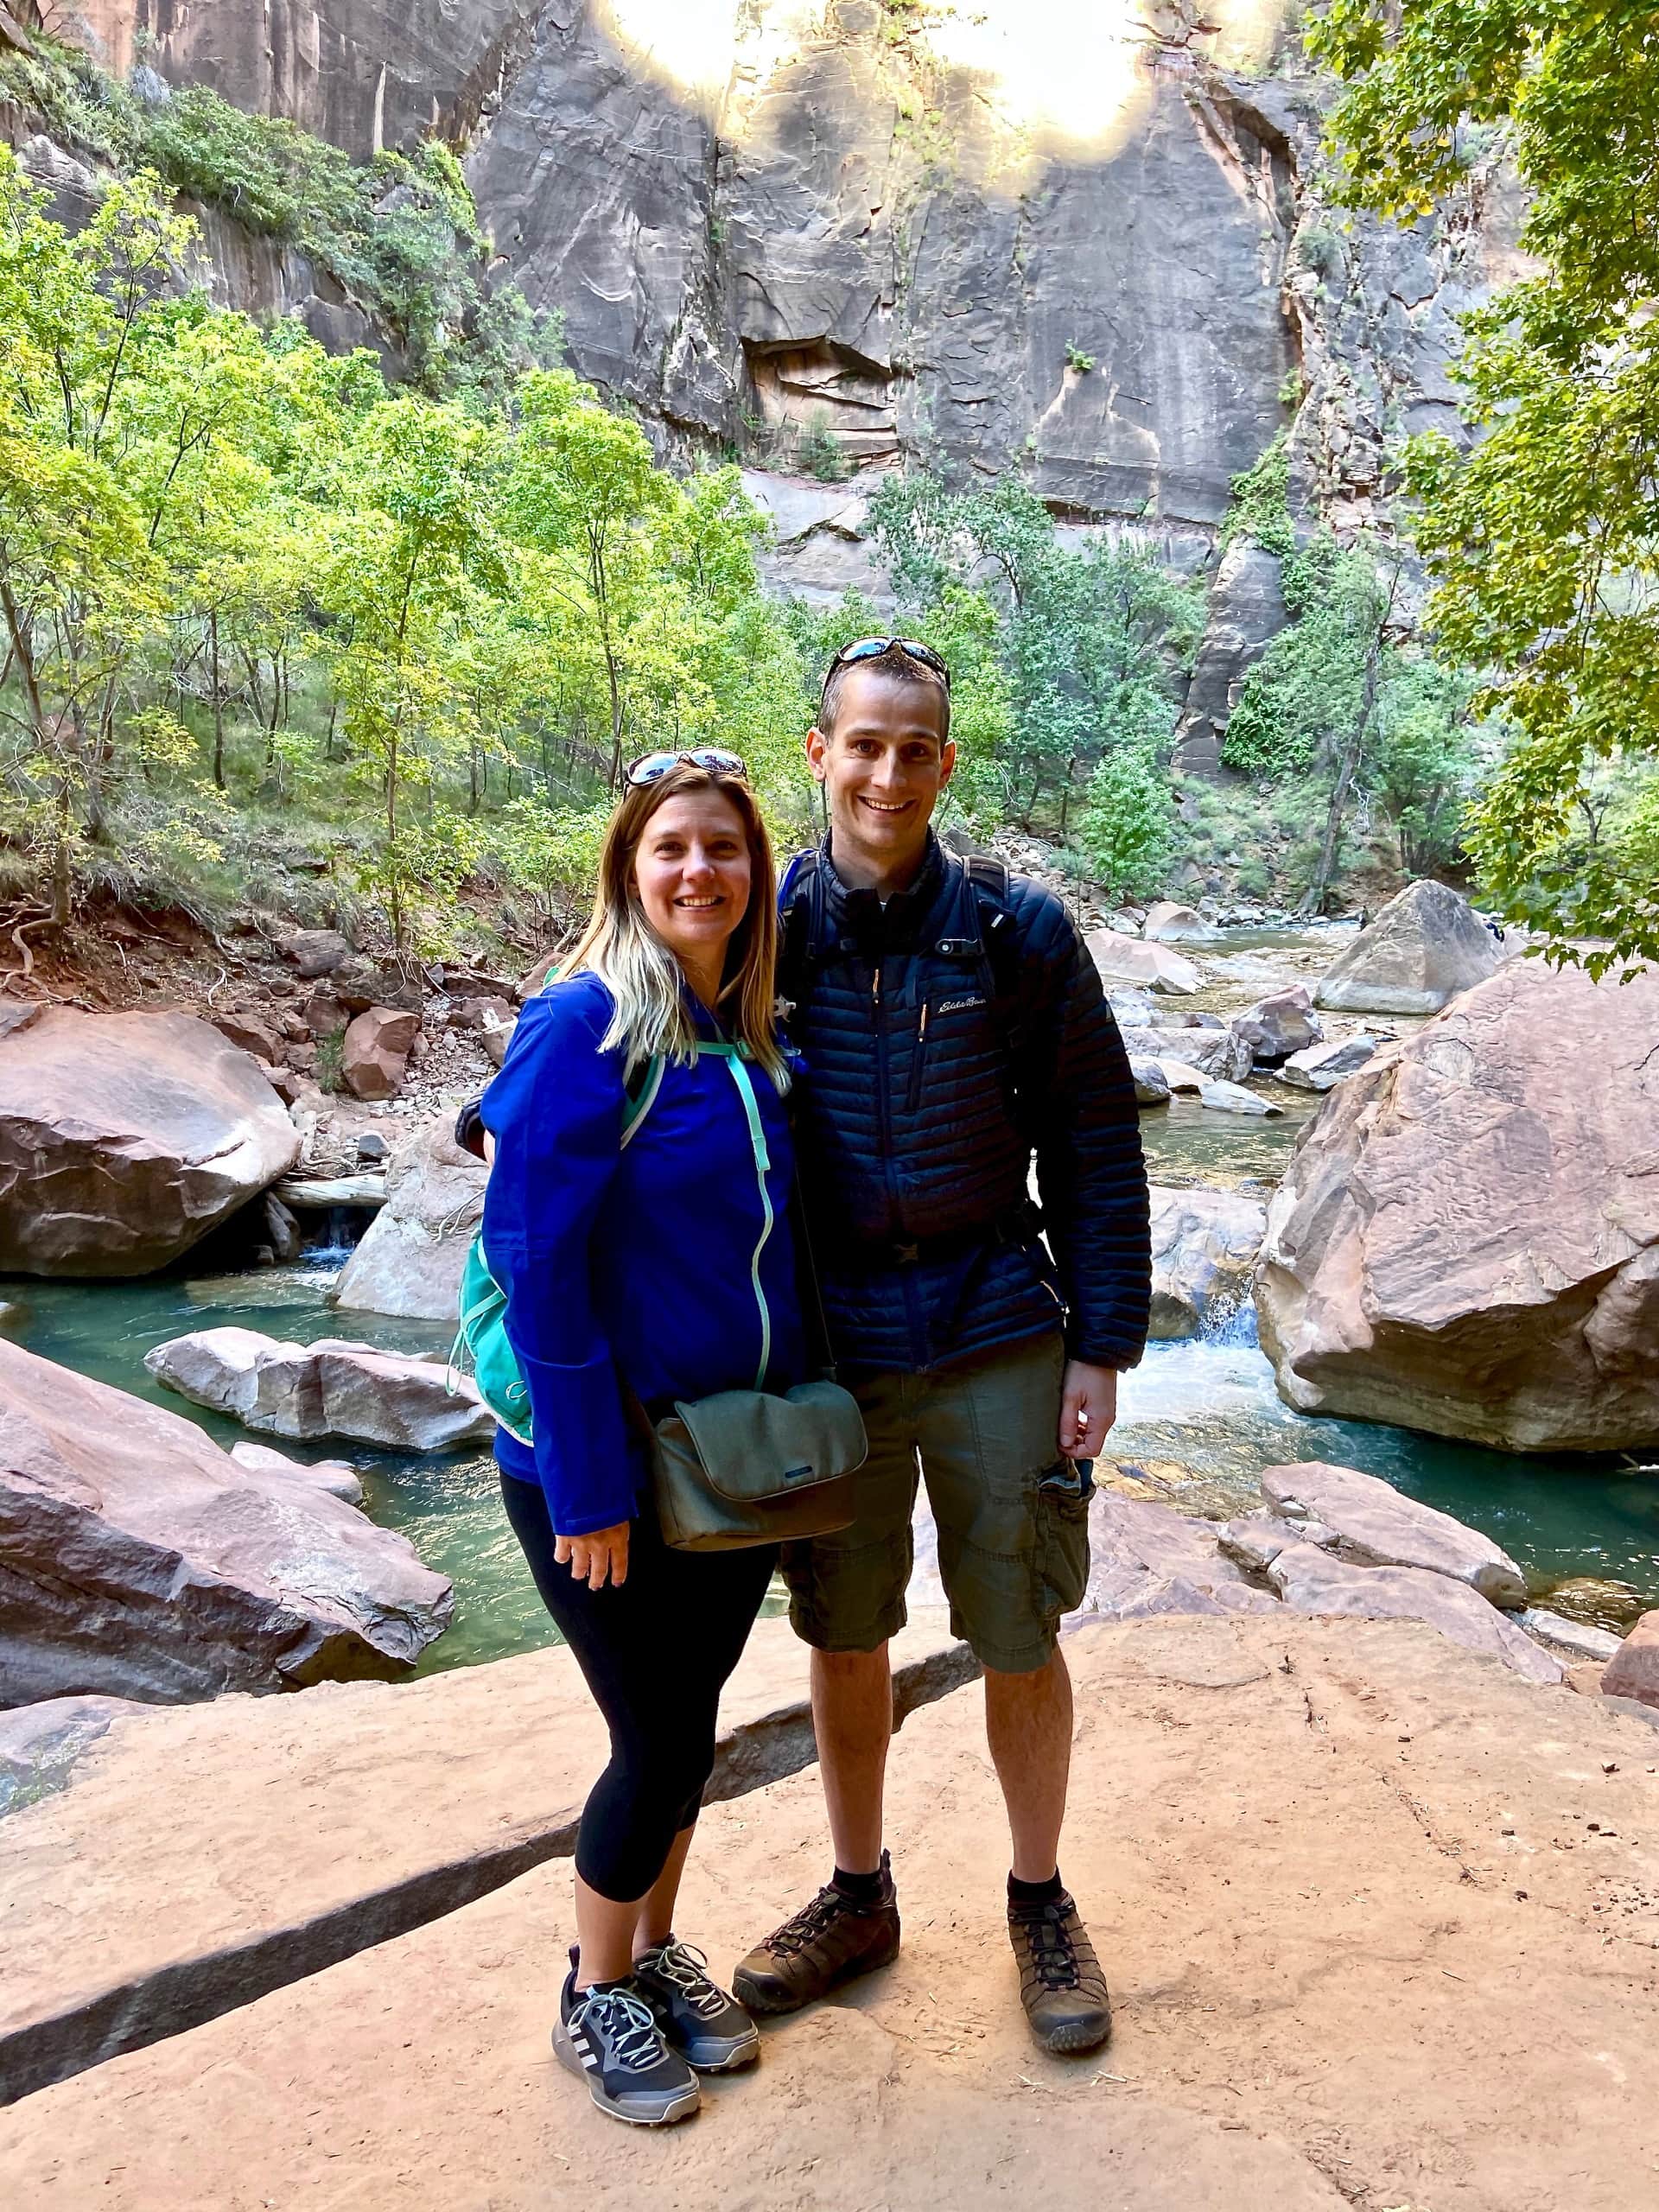 Keith and Lindsey are standing next to the Virgin River on the Riverwalk Trail